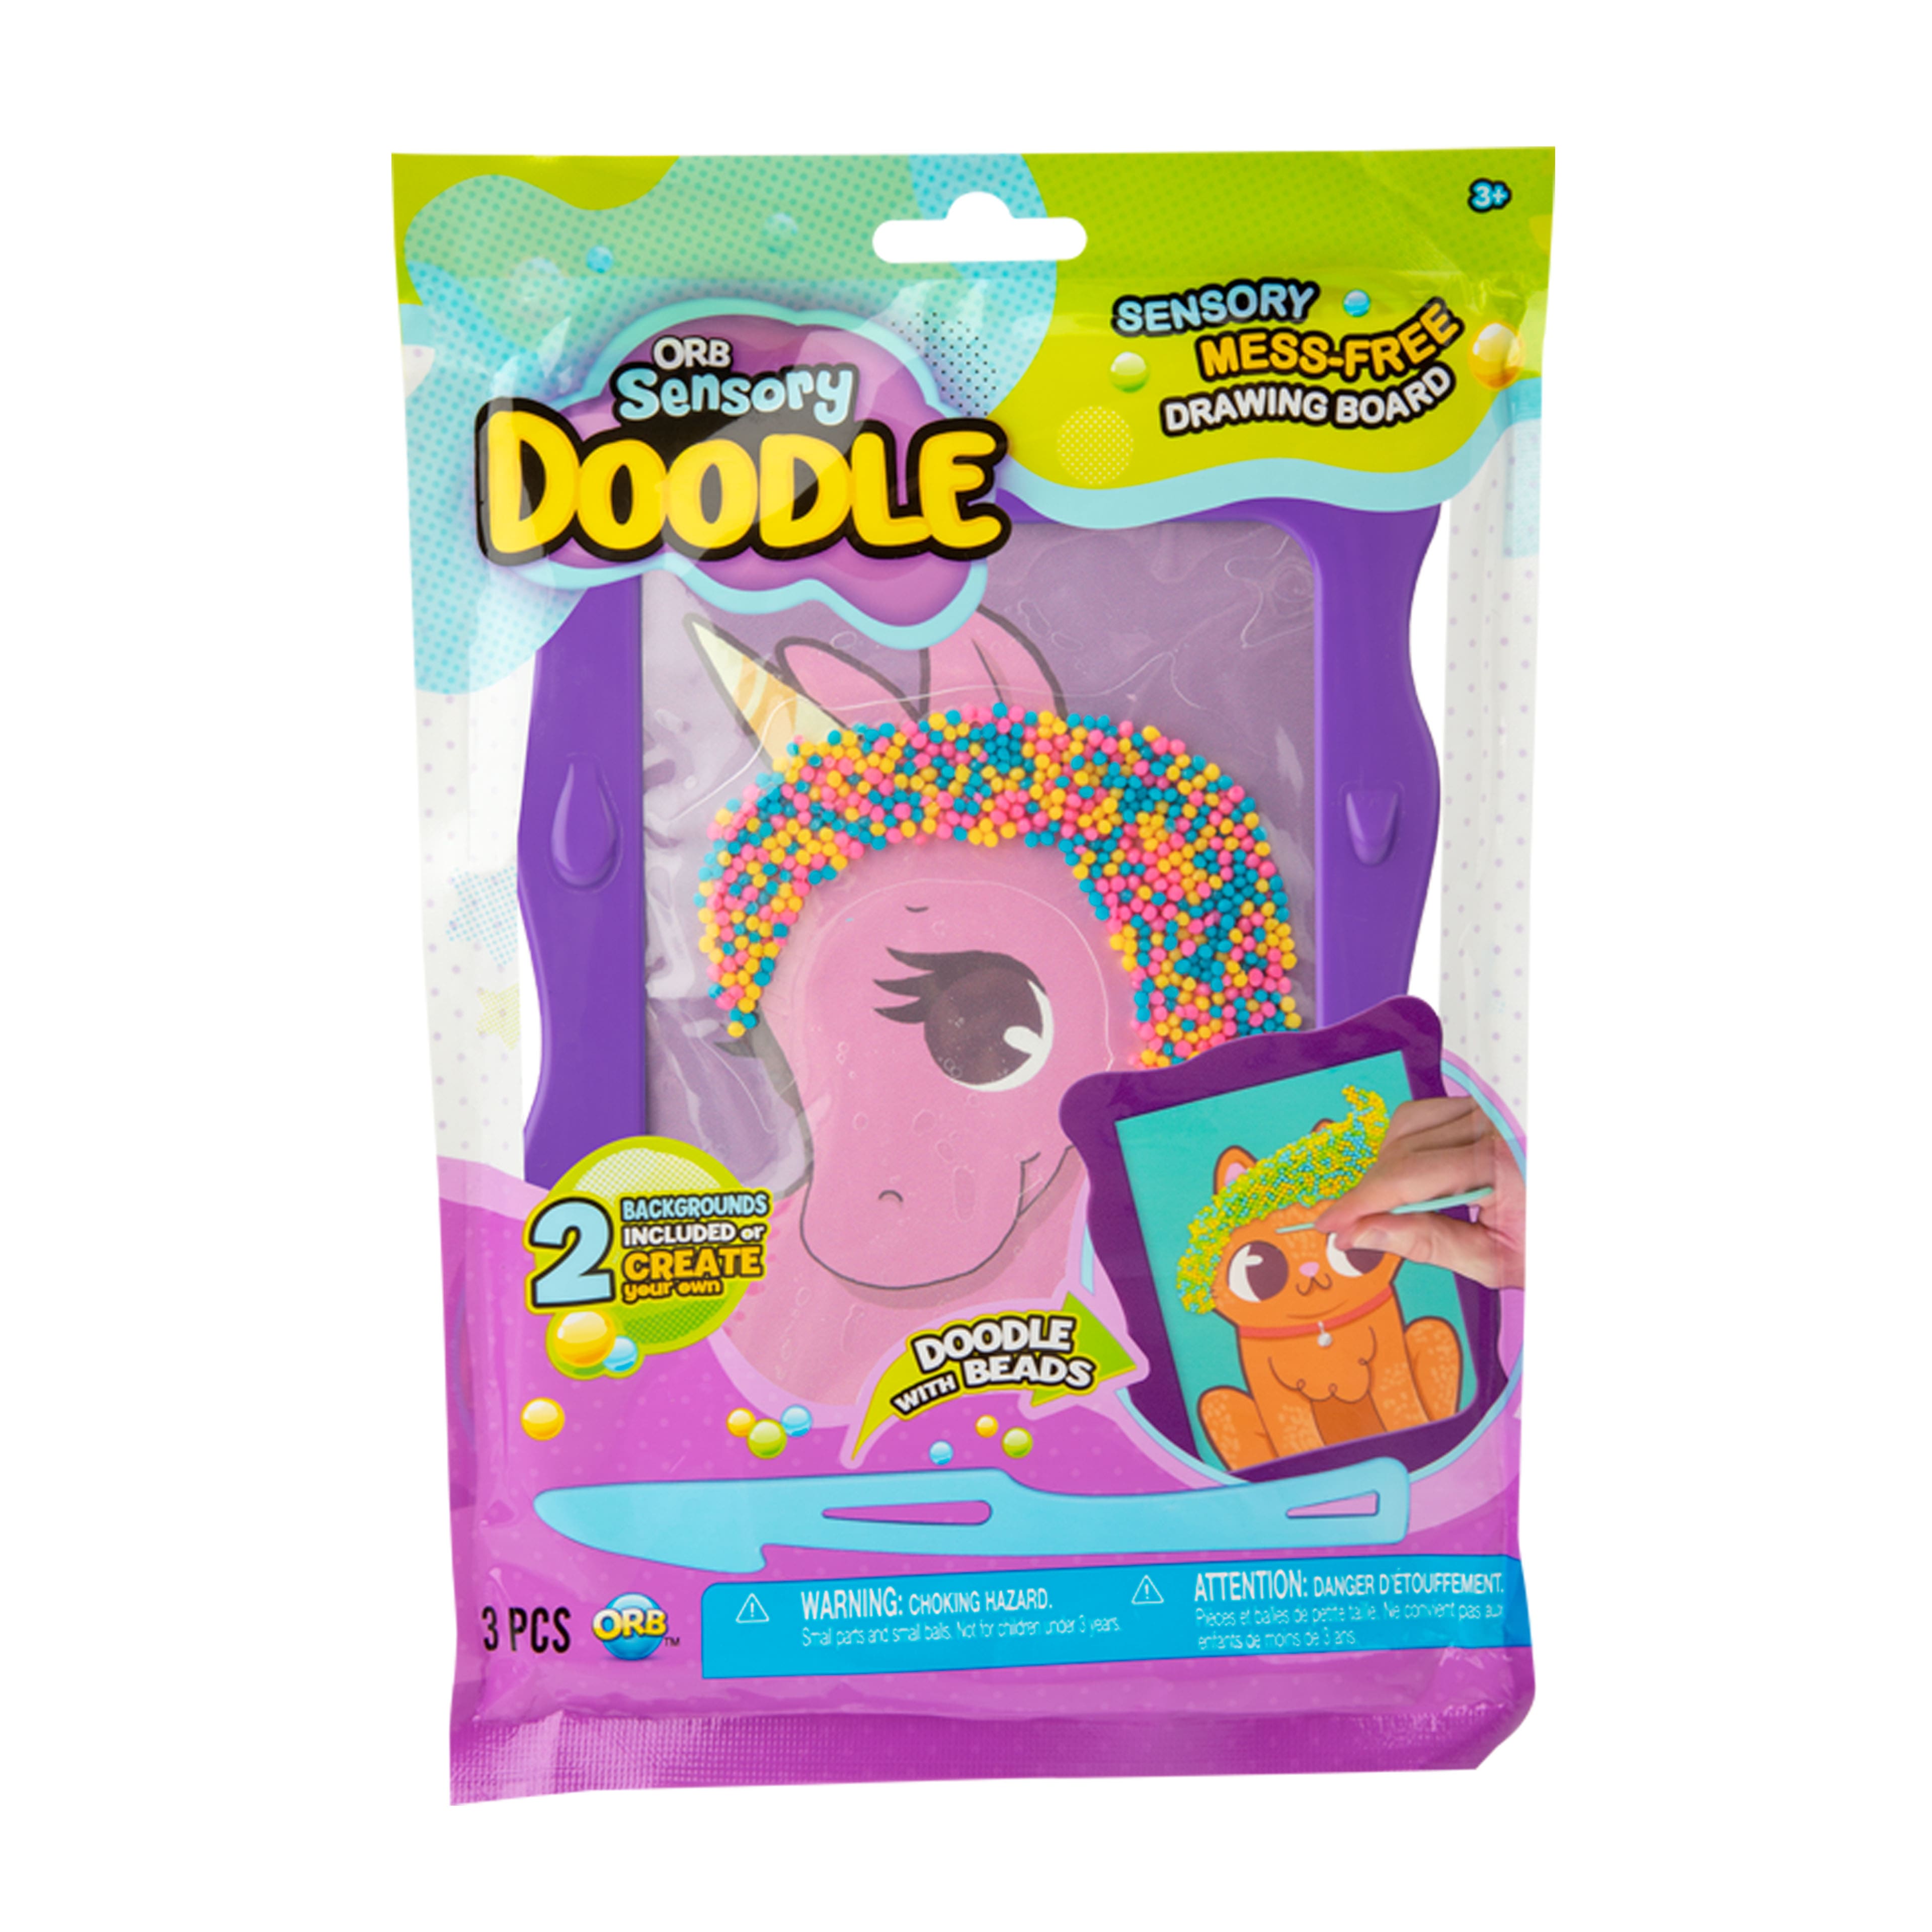 DRAWING PADS FOR KIDS - DOODLE DRAWING BOARDS - Sensory Stand